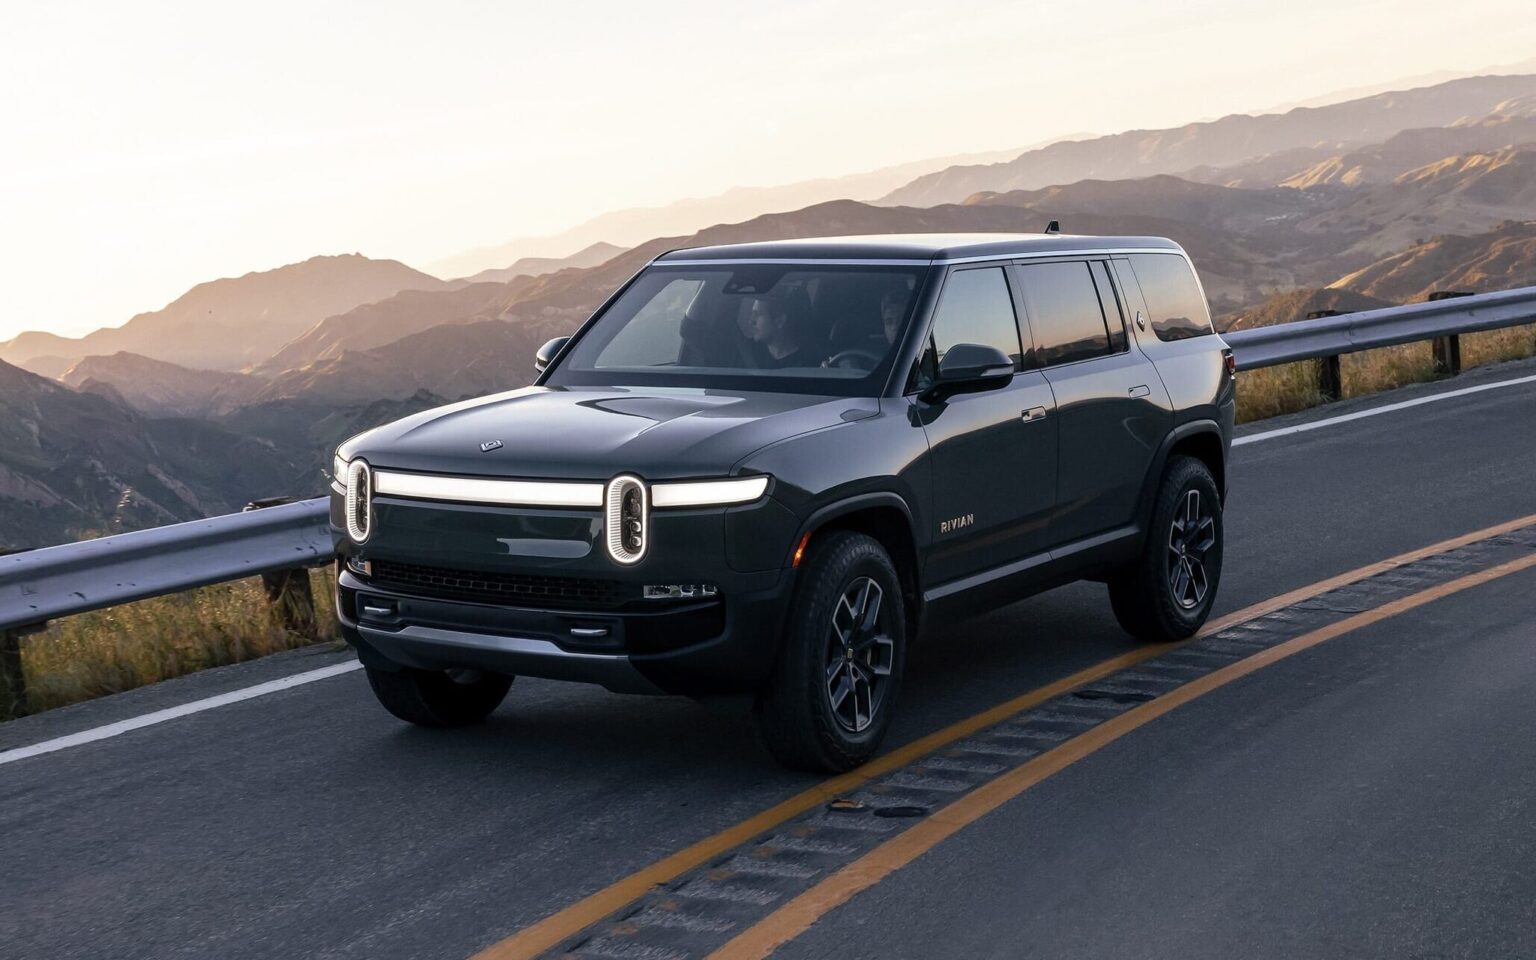 2023 Rivian R1T The Best 7 Seater Electric SUV Exterior Image 1